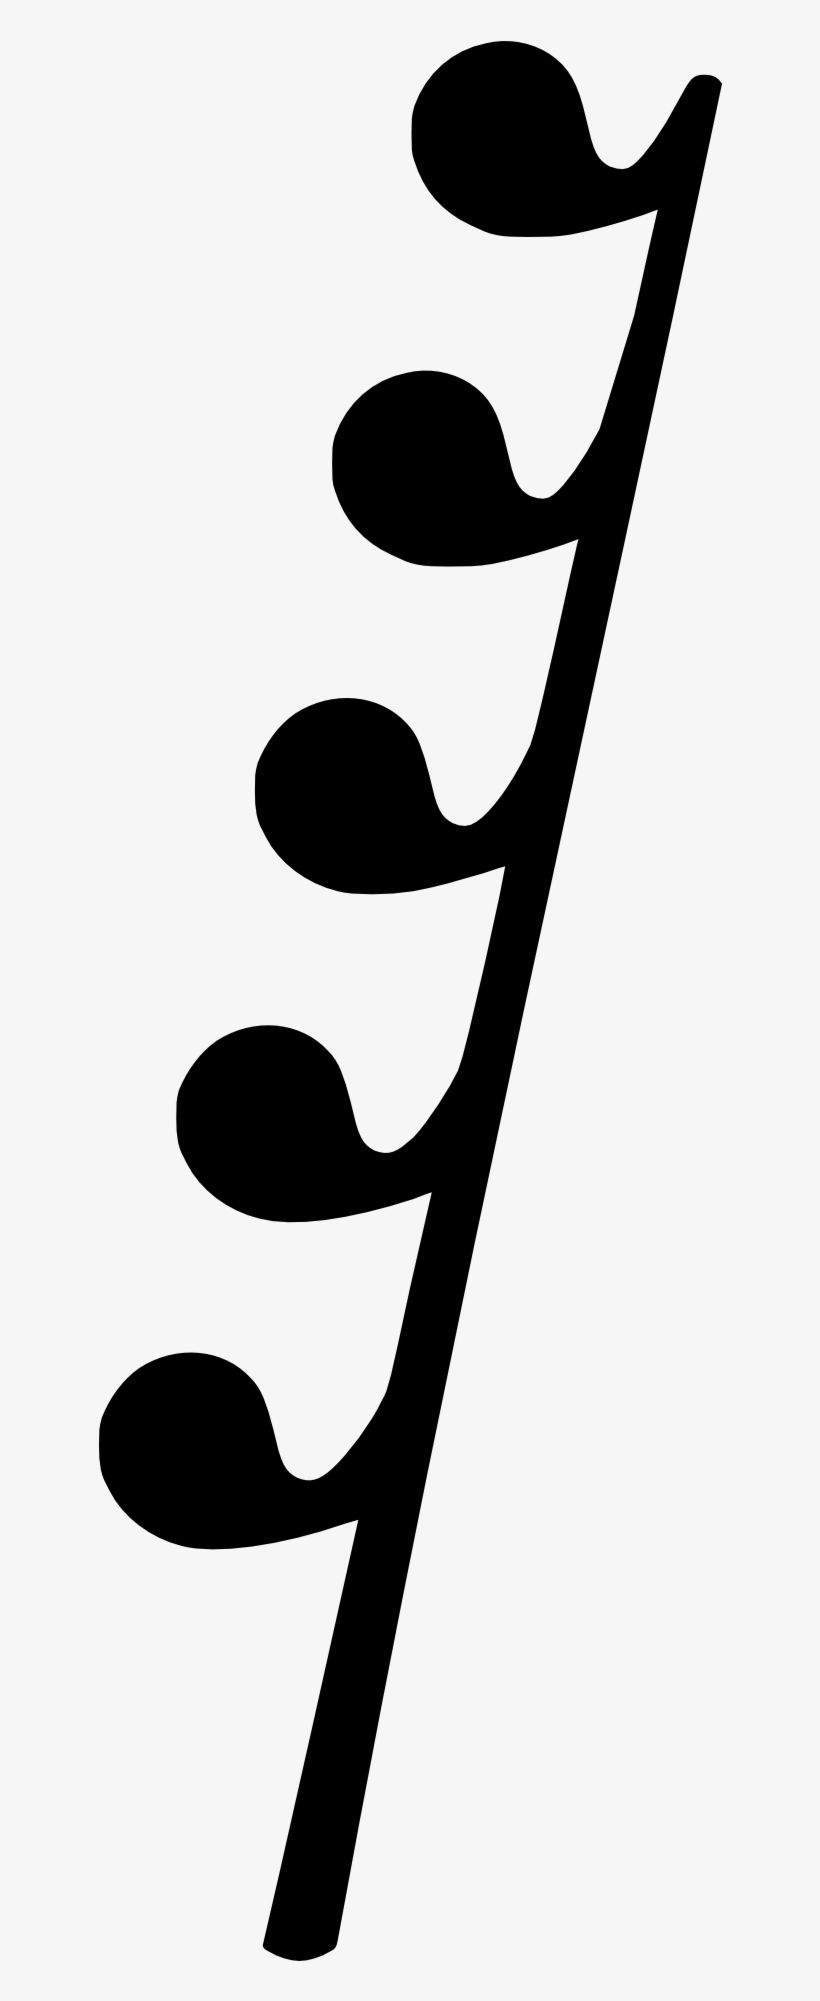 Music Note Musical Notation Symbol - 128th Rest, transparent png #3635322